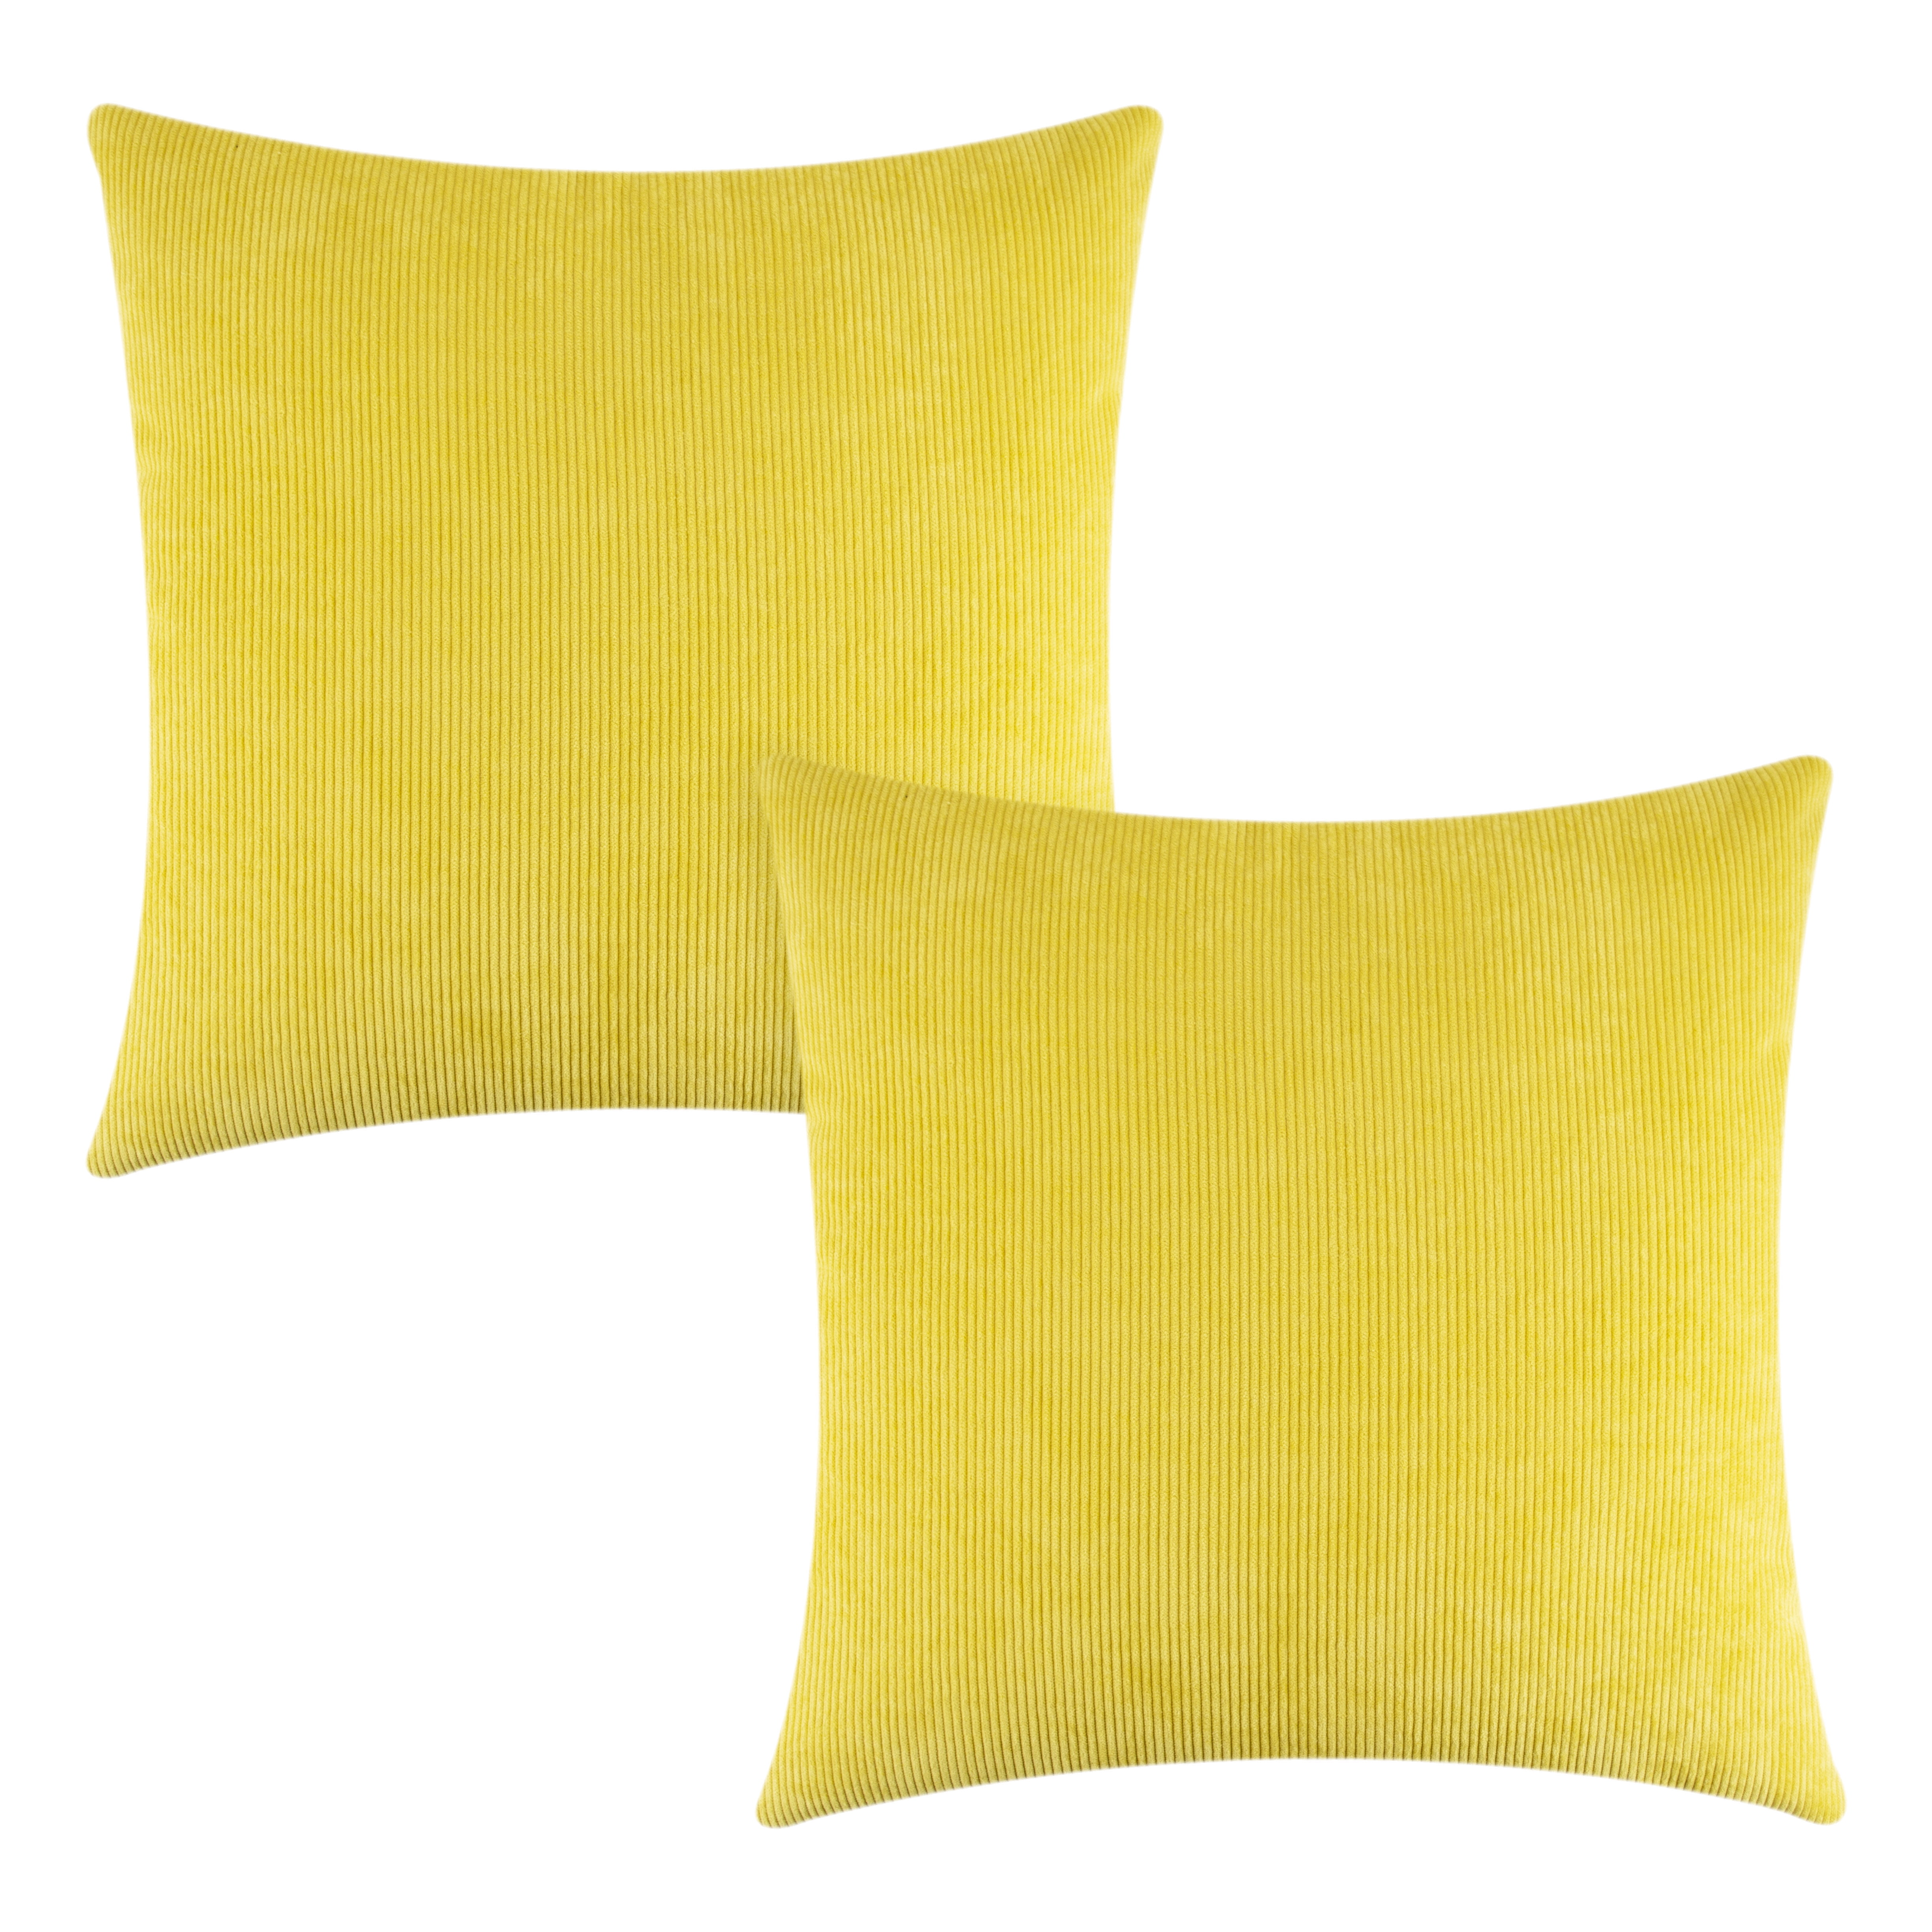 2-Pack 18" x 18" Mainstays Corduroy Pillow Cover (Mustard) $2.15  + Free S&H w/ Walmart+ or $35+